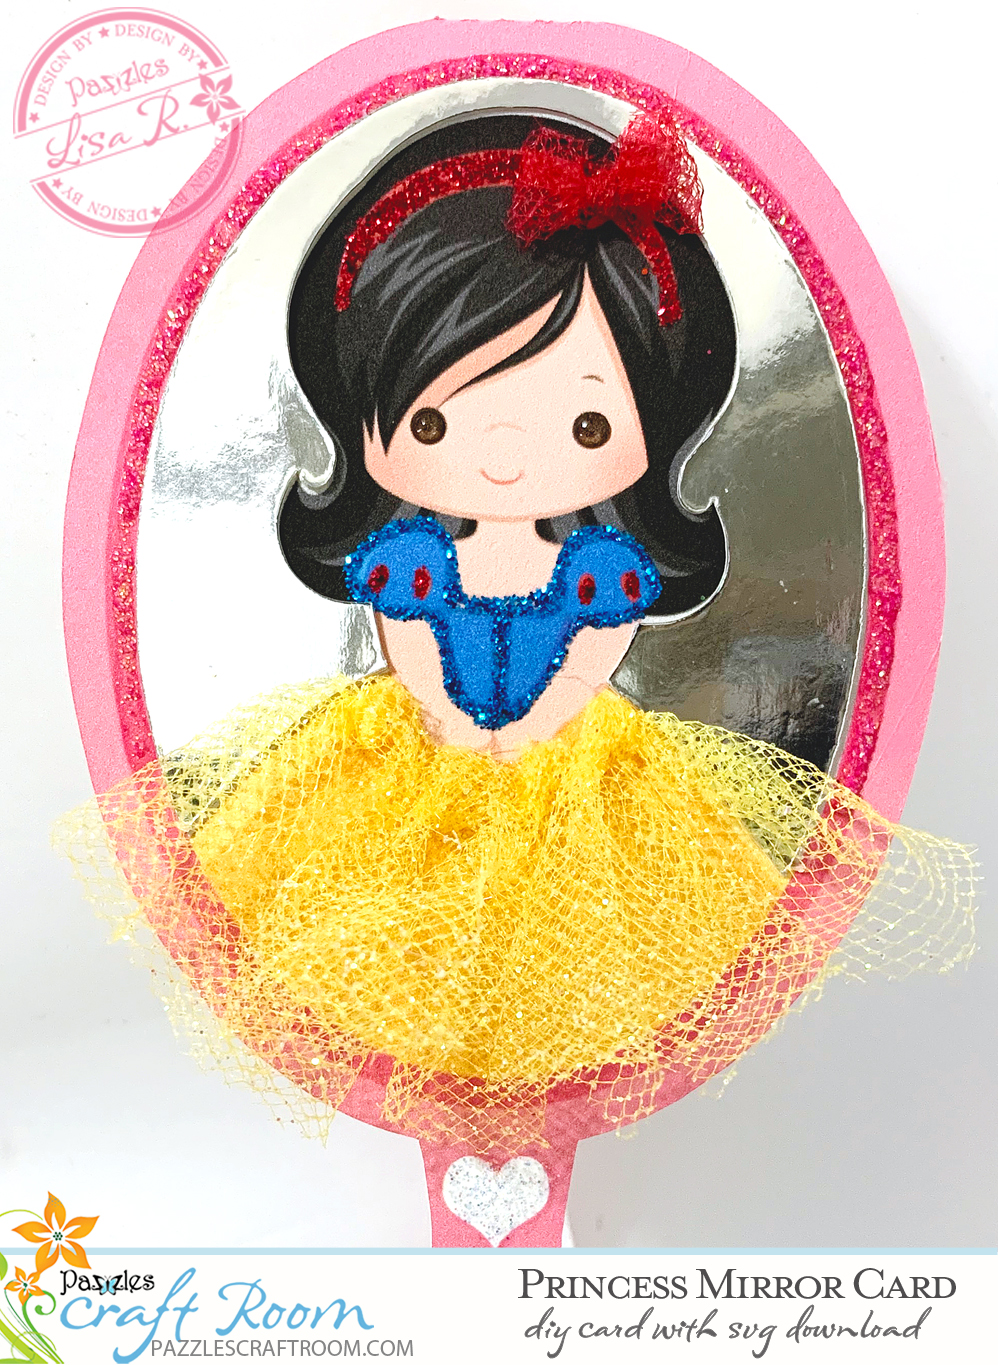 Pazzles Snow White DIY Princess Mirror Card with SVG download. Compatible with all major electronic cutters including Pazzles Inspiration, Cricut, and Silhouette Cameo. Design by Lisa Reyna.